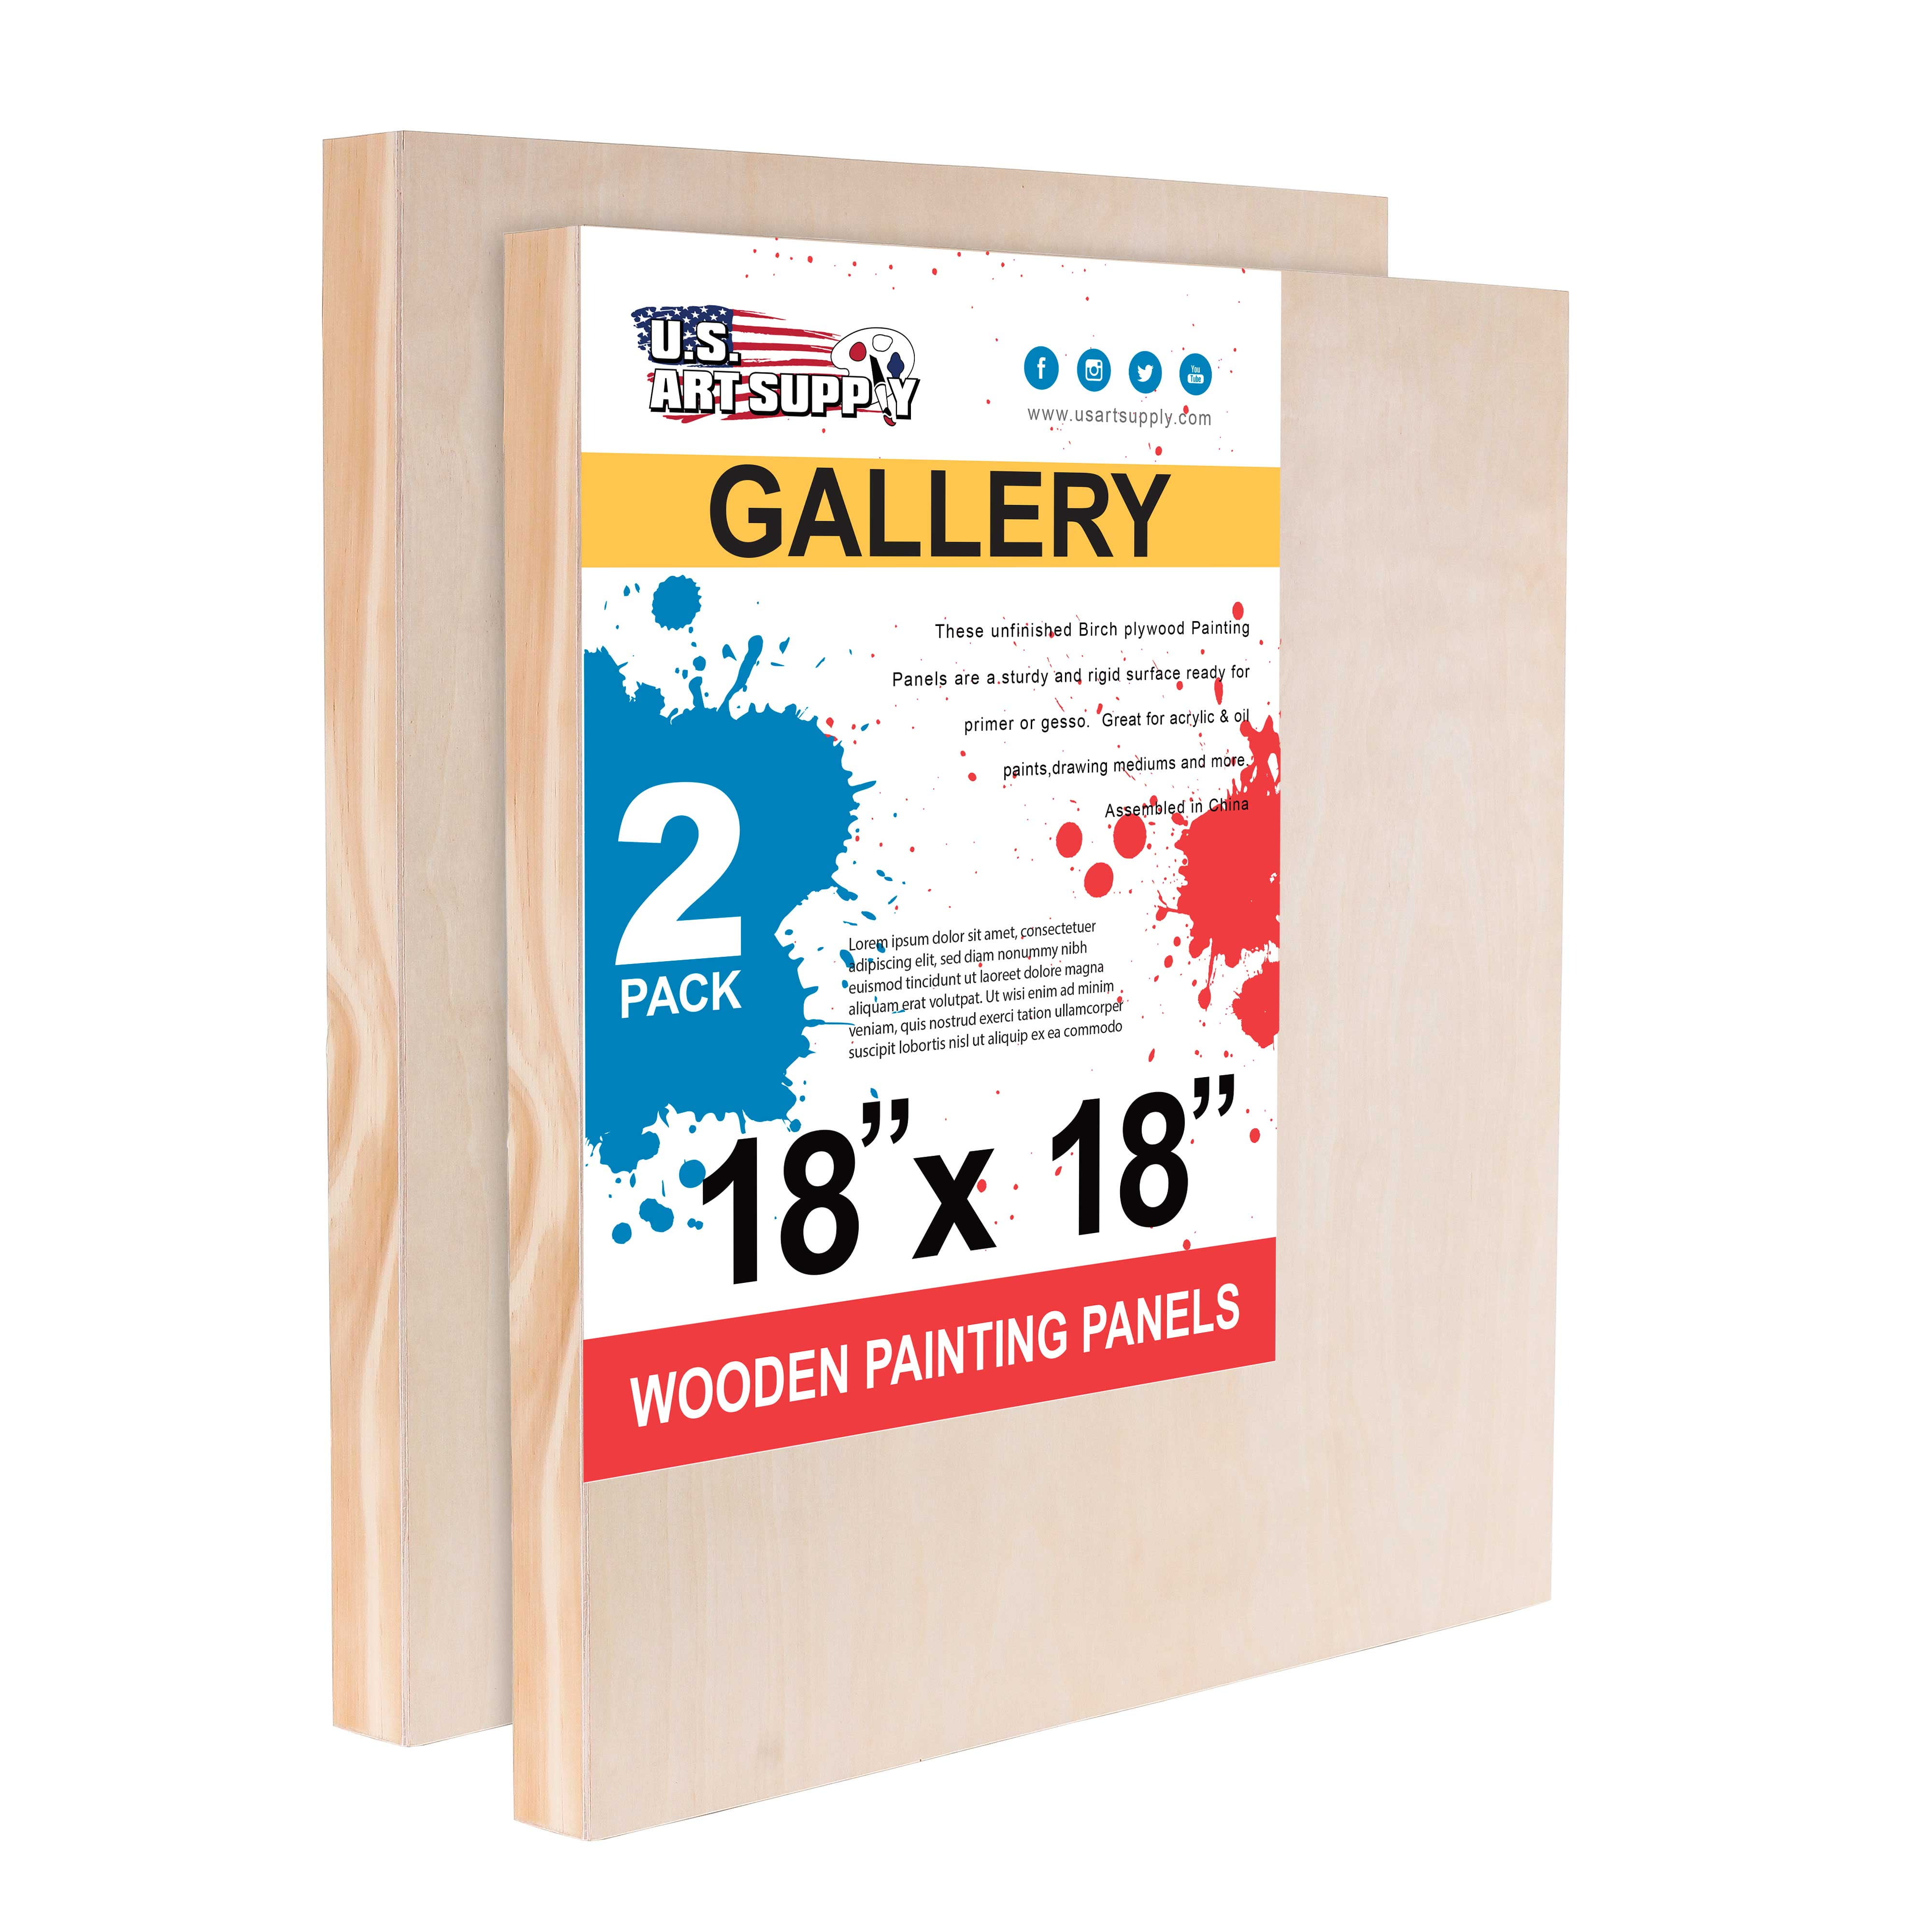 Painting Mixed-Media Craft Oil Gallery 1-1/2 Deep Cradle Art Supply 16 x 16 Birch Wood Paint Pouring Panel Boards - Artist Depth Wooden Wall Canvases Acrylic Encaustic Pack of 2 U.S 